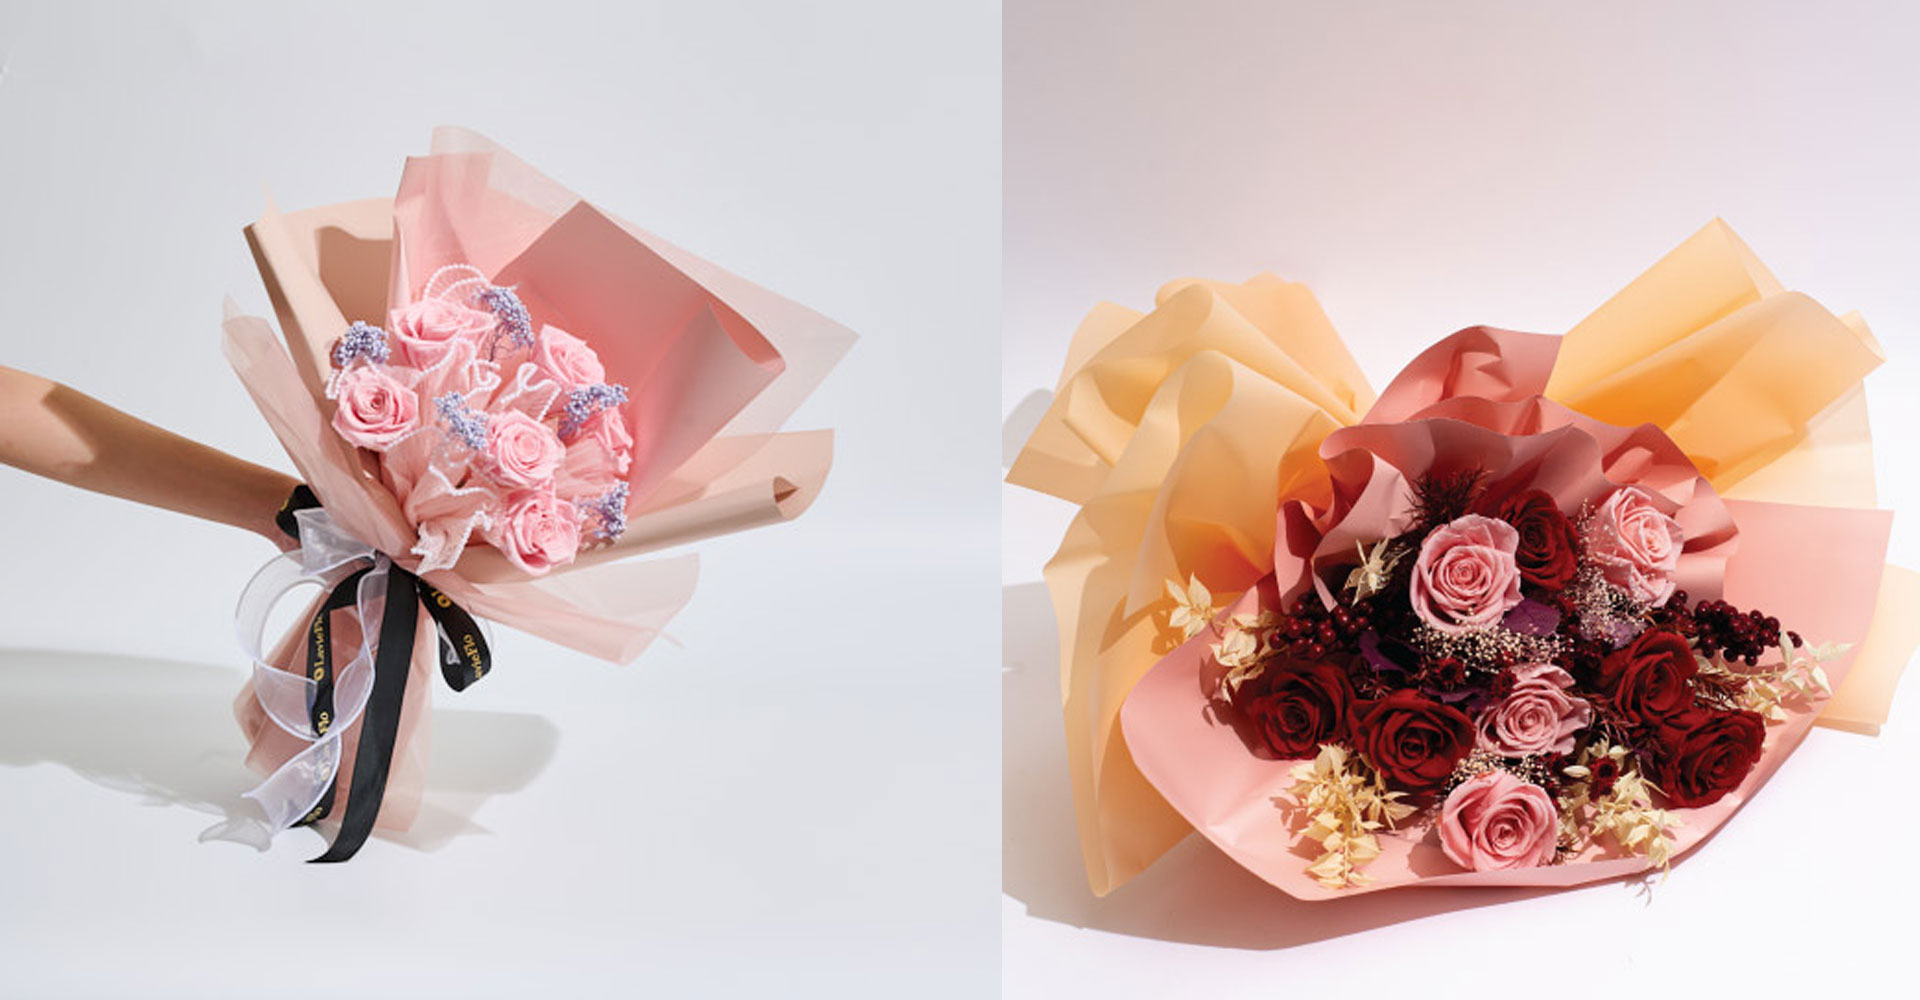 Top Choices for Birthday Flower Bouquet for Your Loved Ones